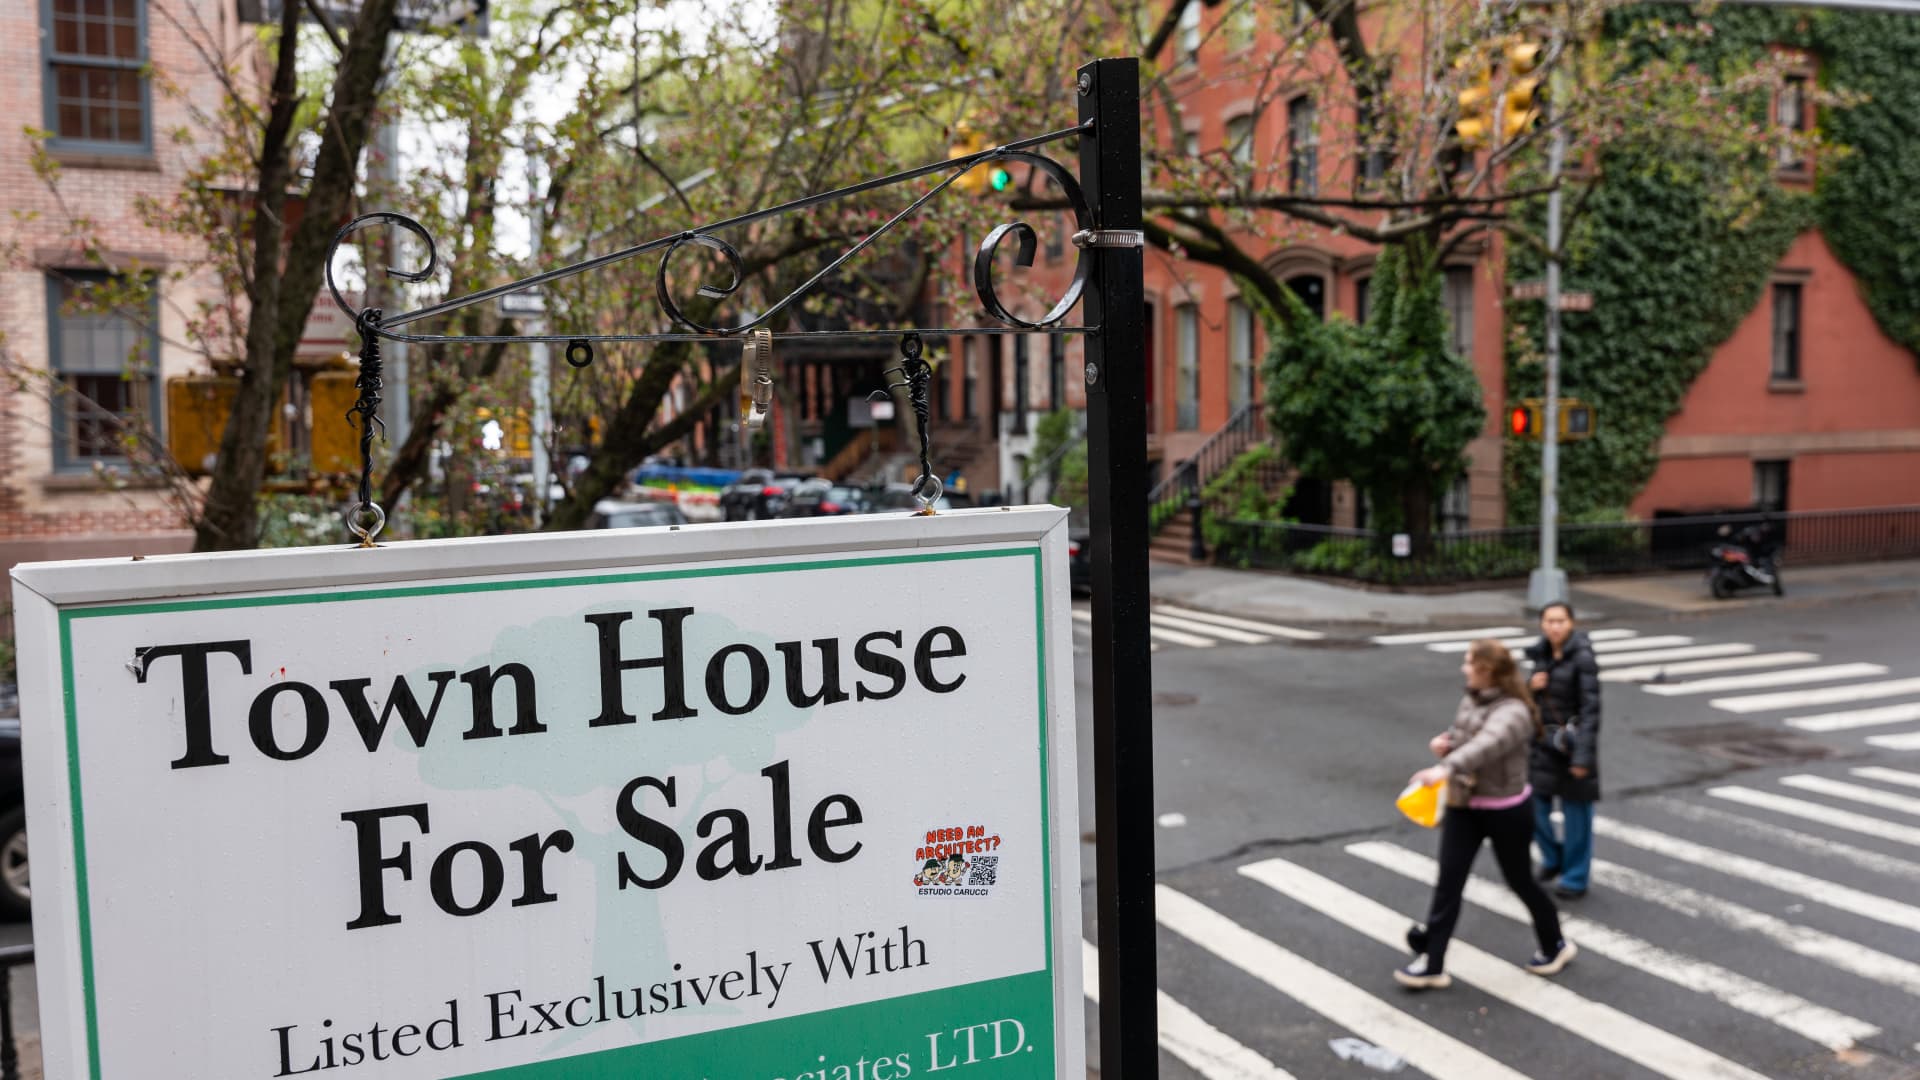 Manhattan is a 'buyer's market' as real estate prices fall and inventory rises